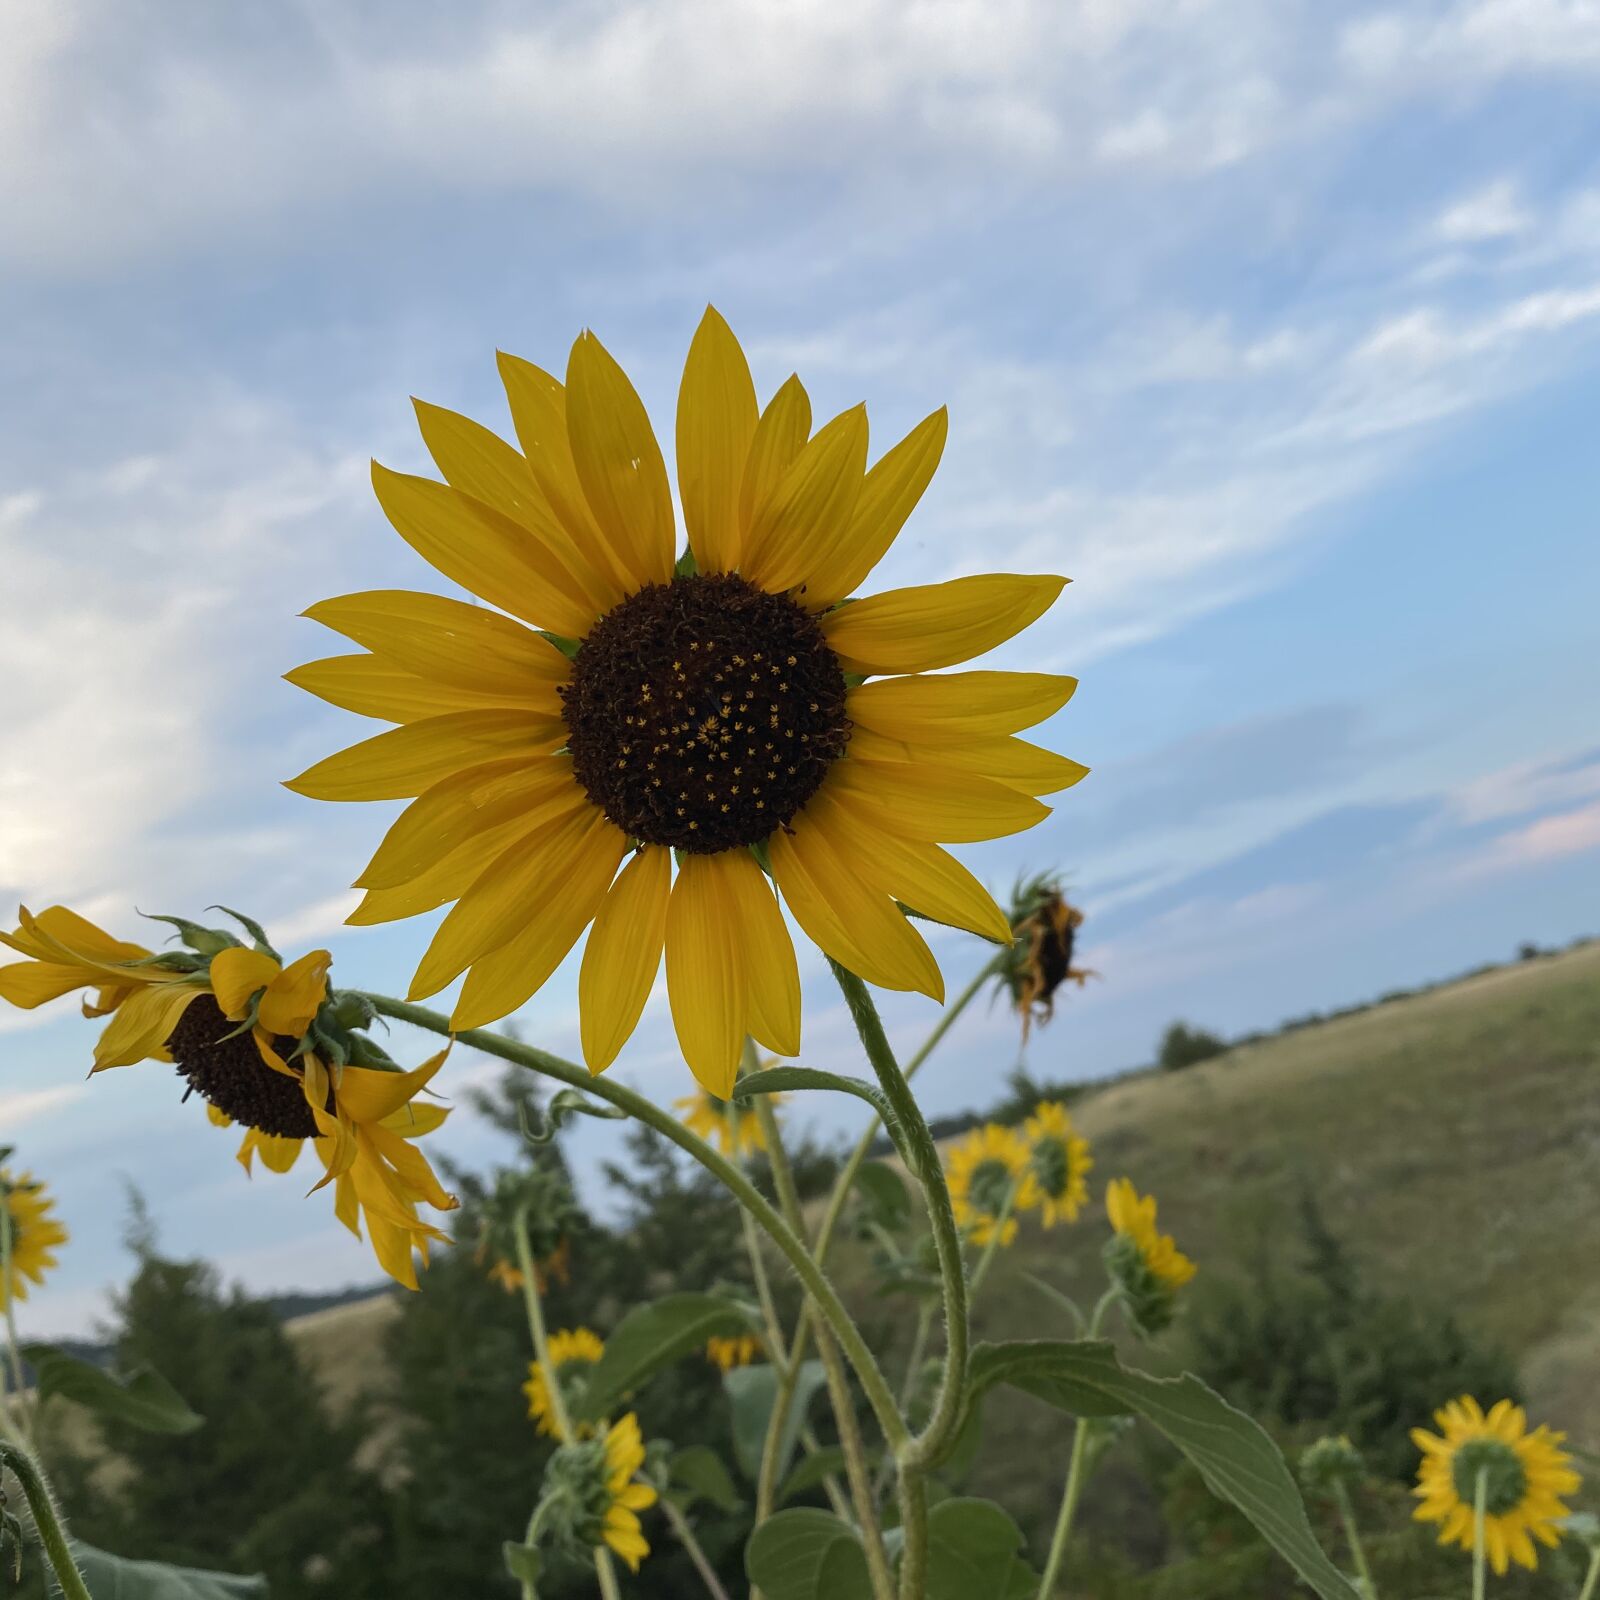 iPhone 11 Pro Max back triple camera 4.25mm f/1.8 sample photo. Sunflower, clouds, landscape photography